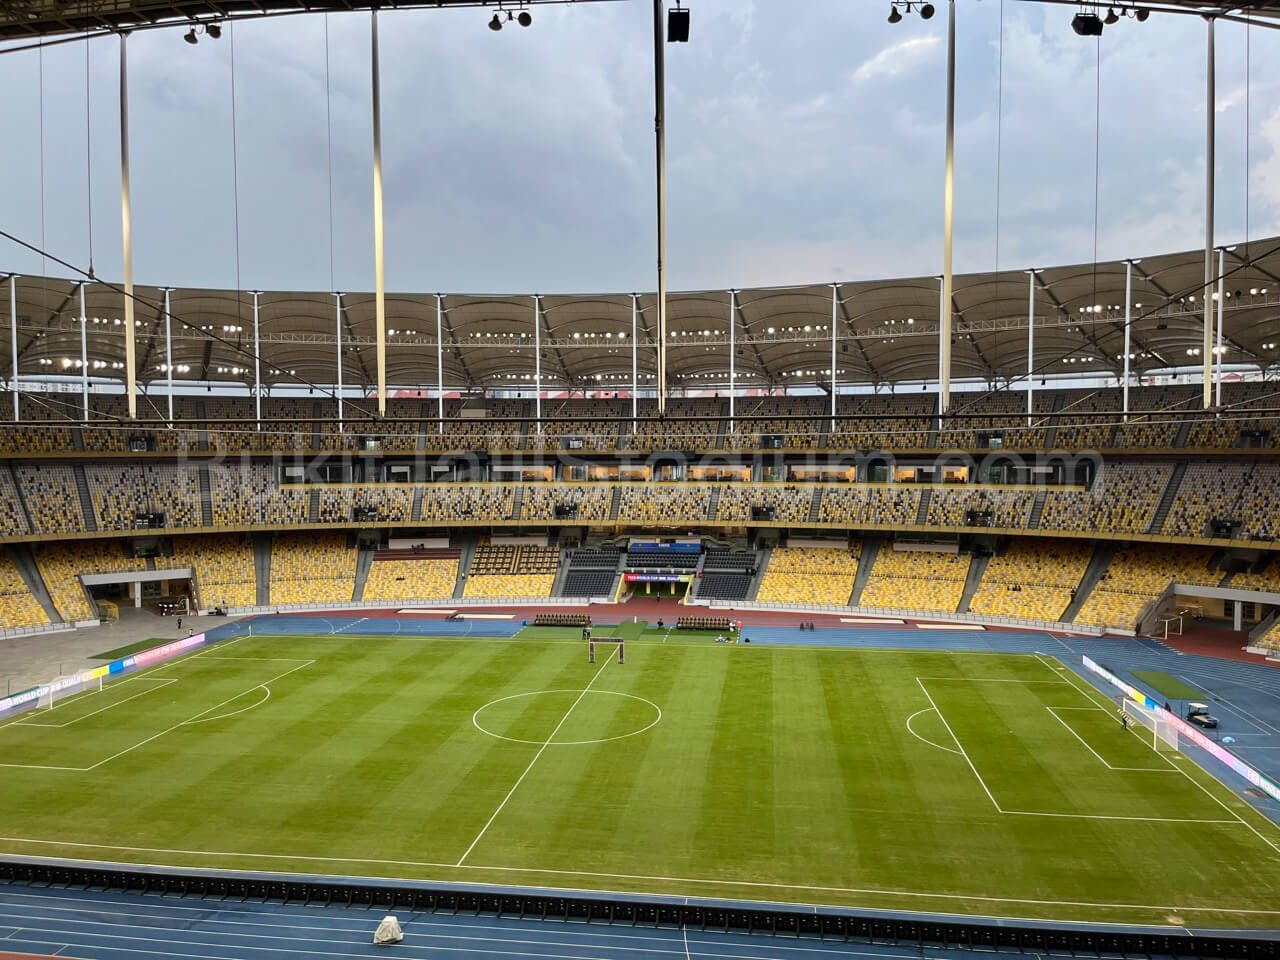 1x View of Bukit Jalil field from section 313 of Stadium Bukit Jalil.